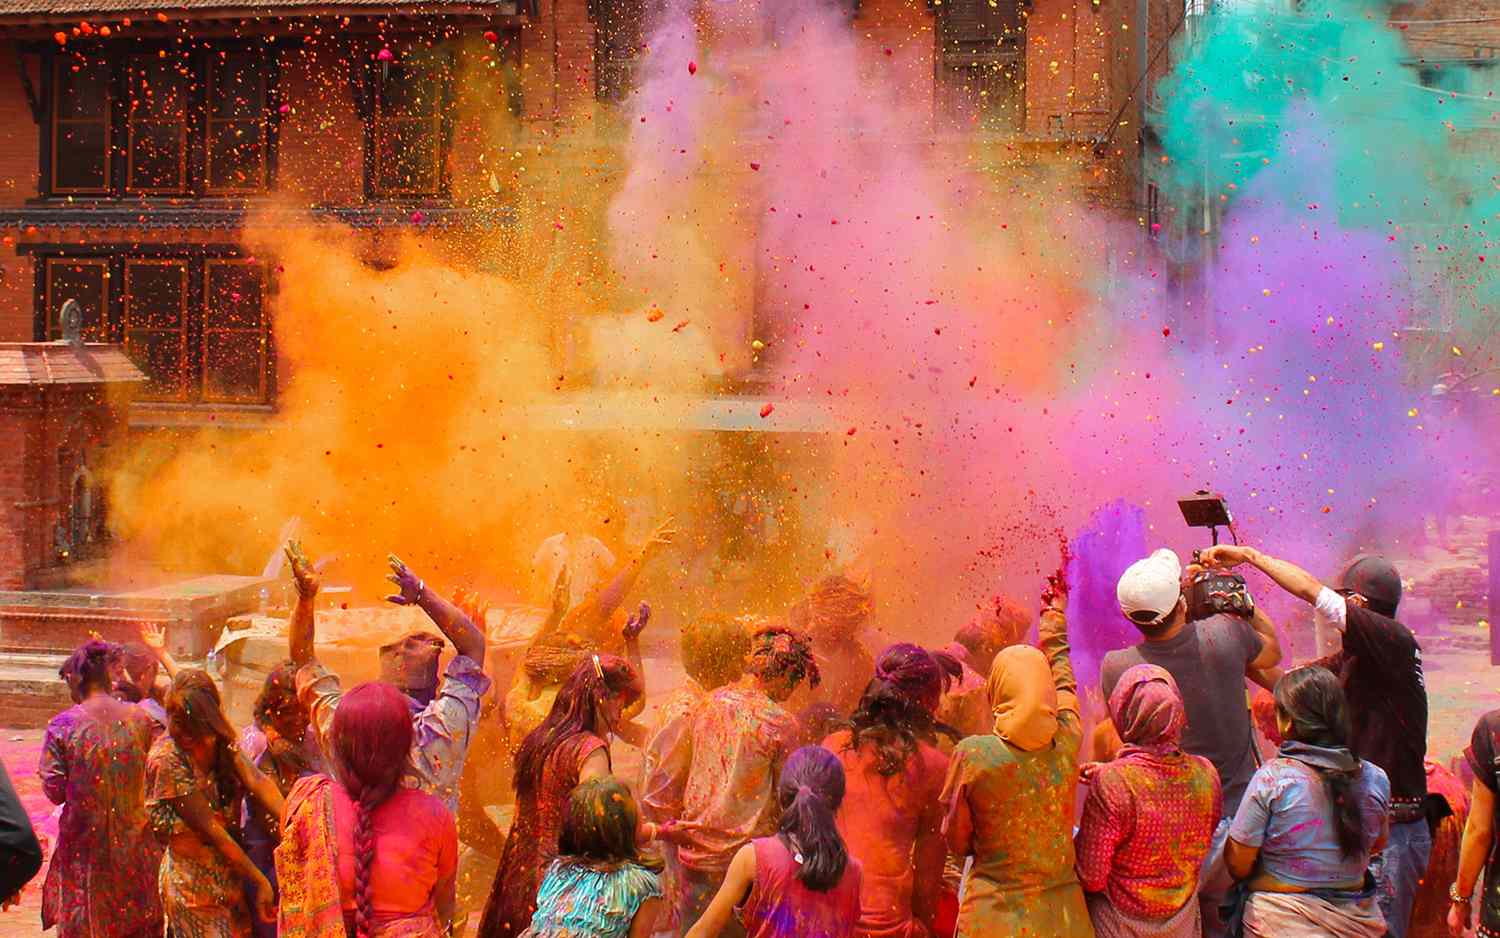 a crowd of people in India throwing colored powder in the air in celebration